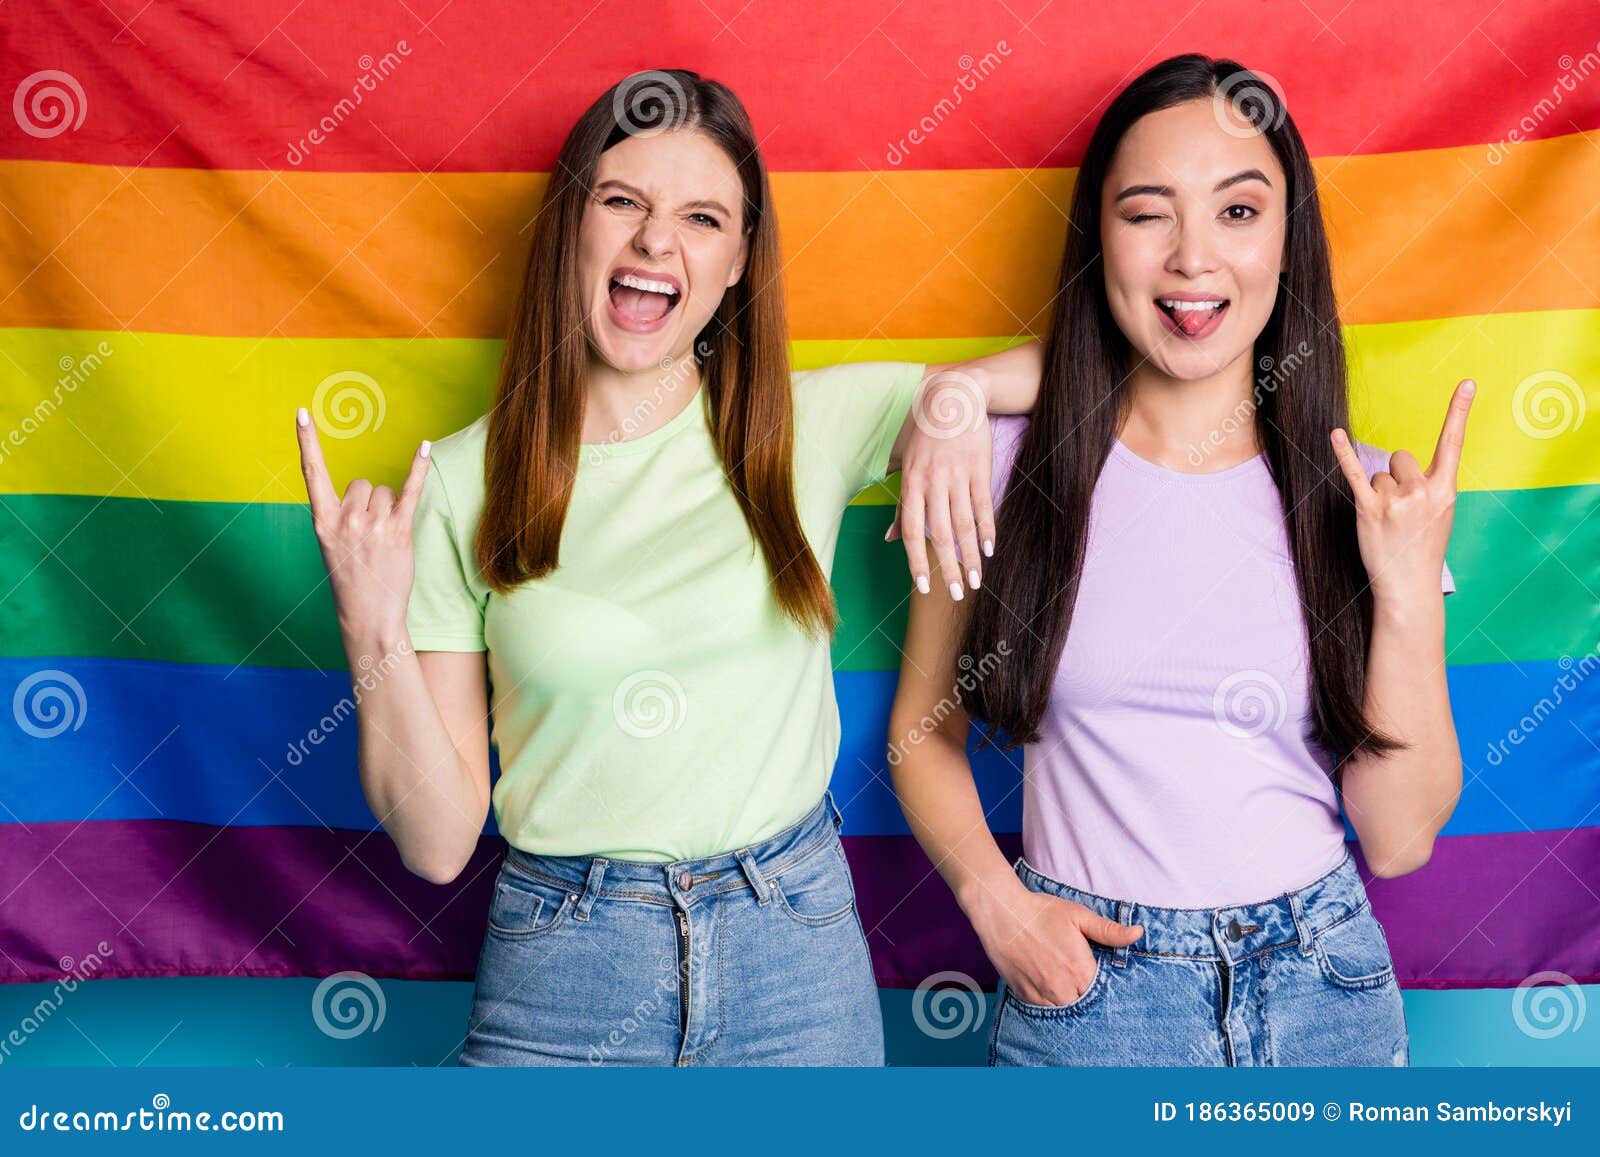 Photo of Pretty Crazy Lesbians Couple Ladies Parade Day Support Same Sex Marriage Showing Horns Tongue Stand in Front of Stock Image pic